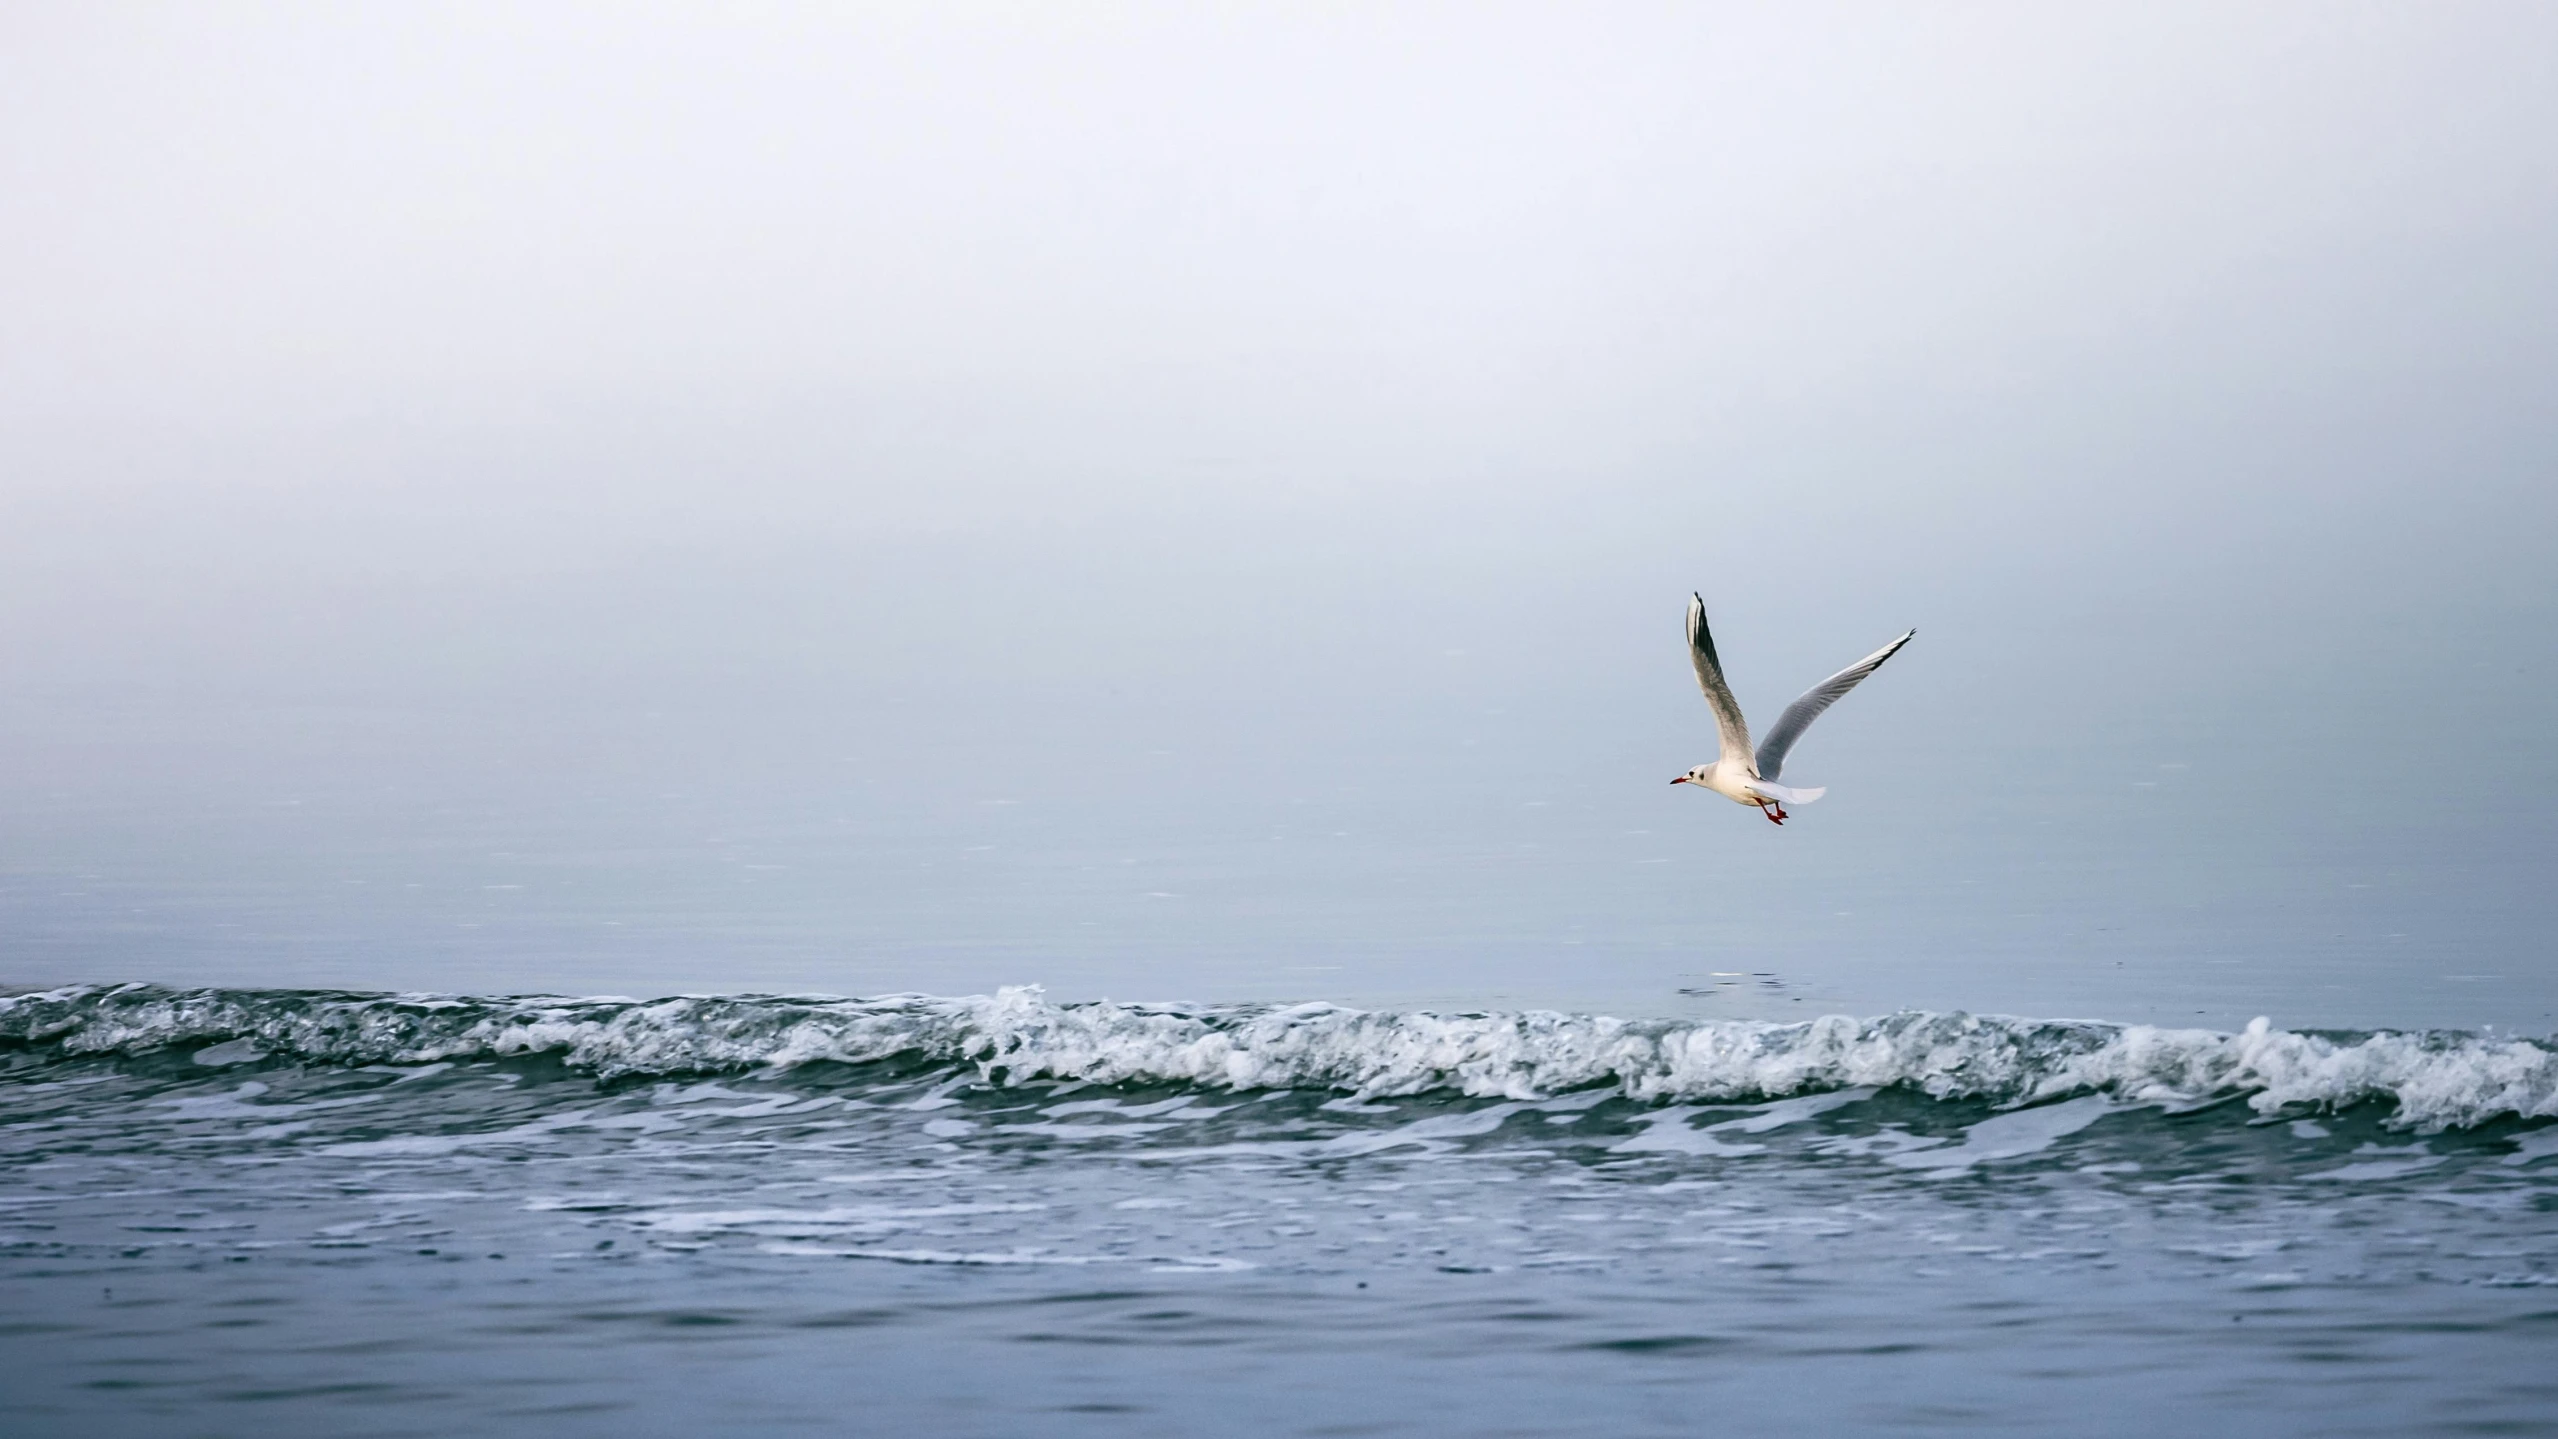 an ocean scene with a seagull flying high up above the waves